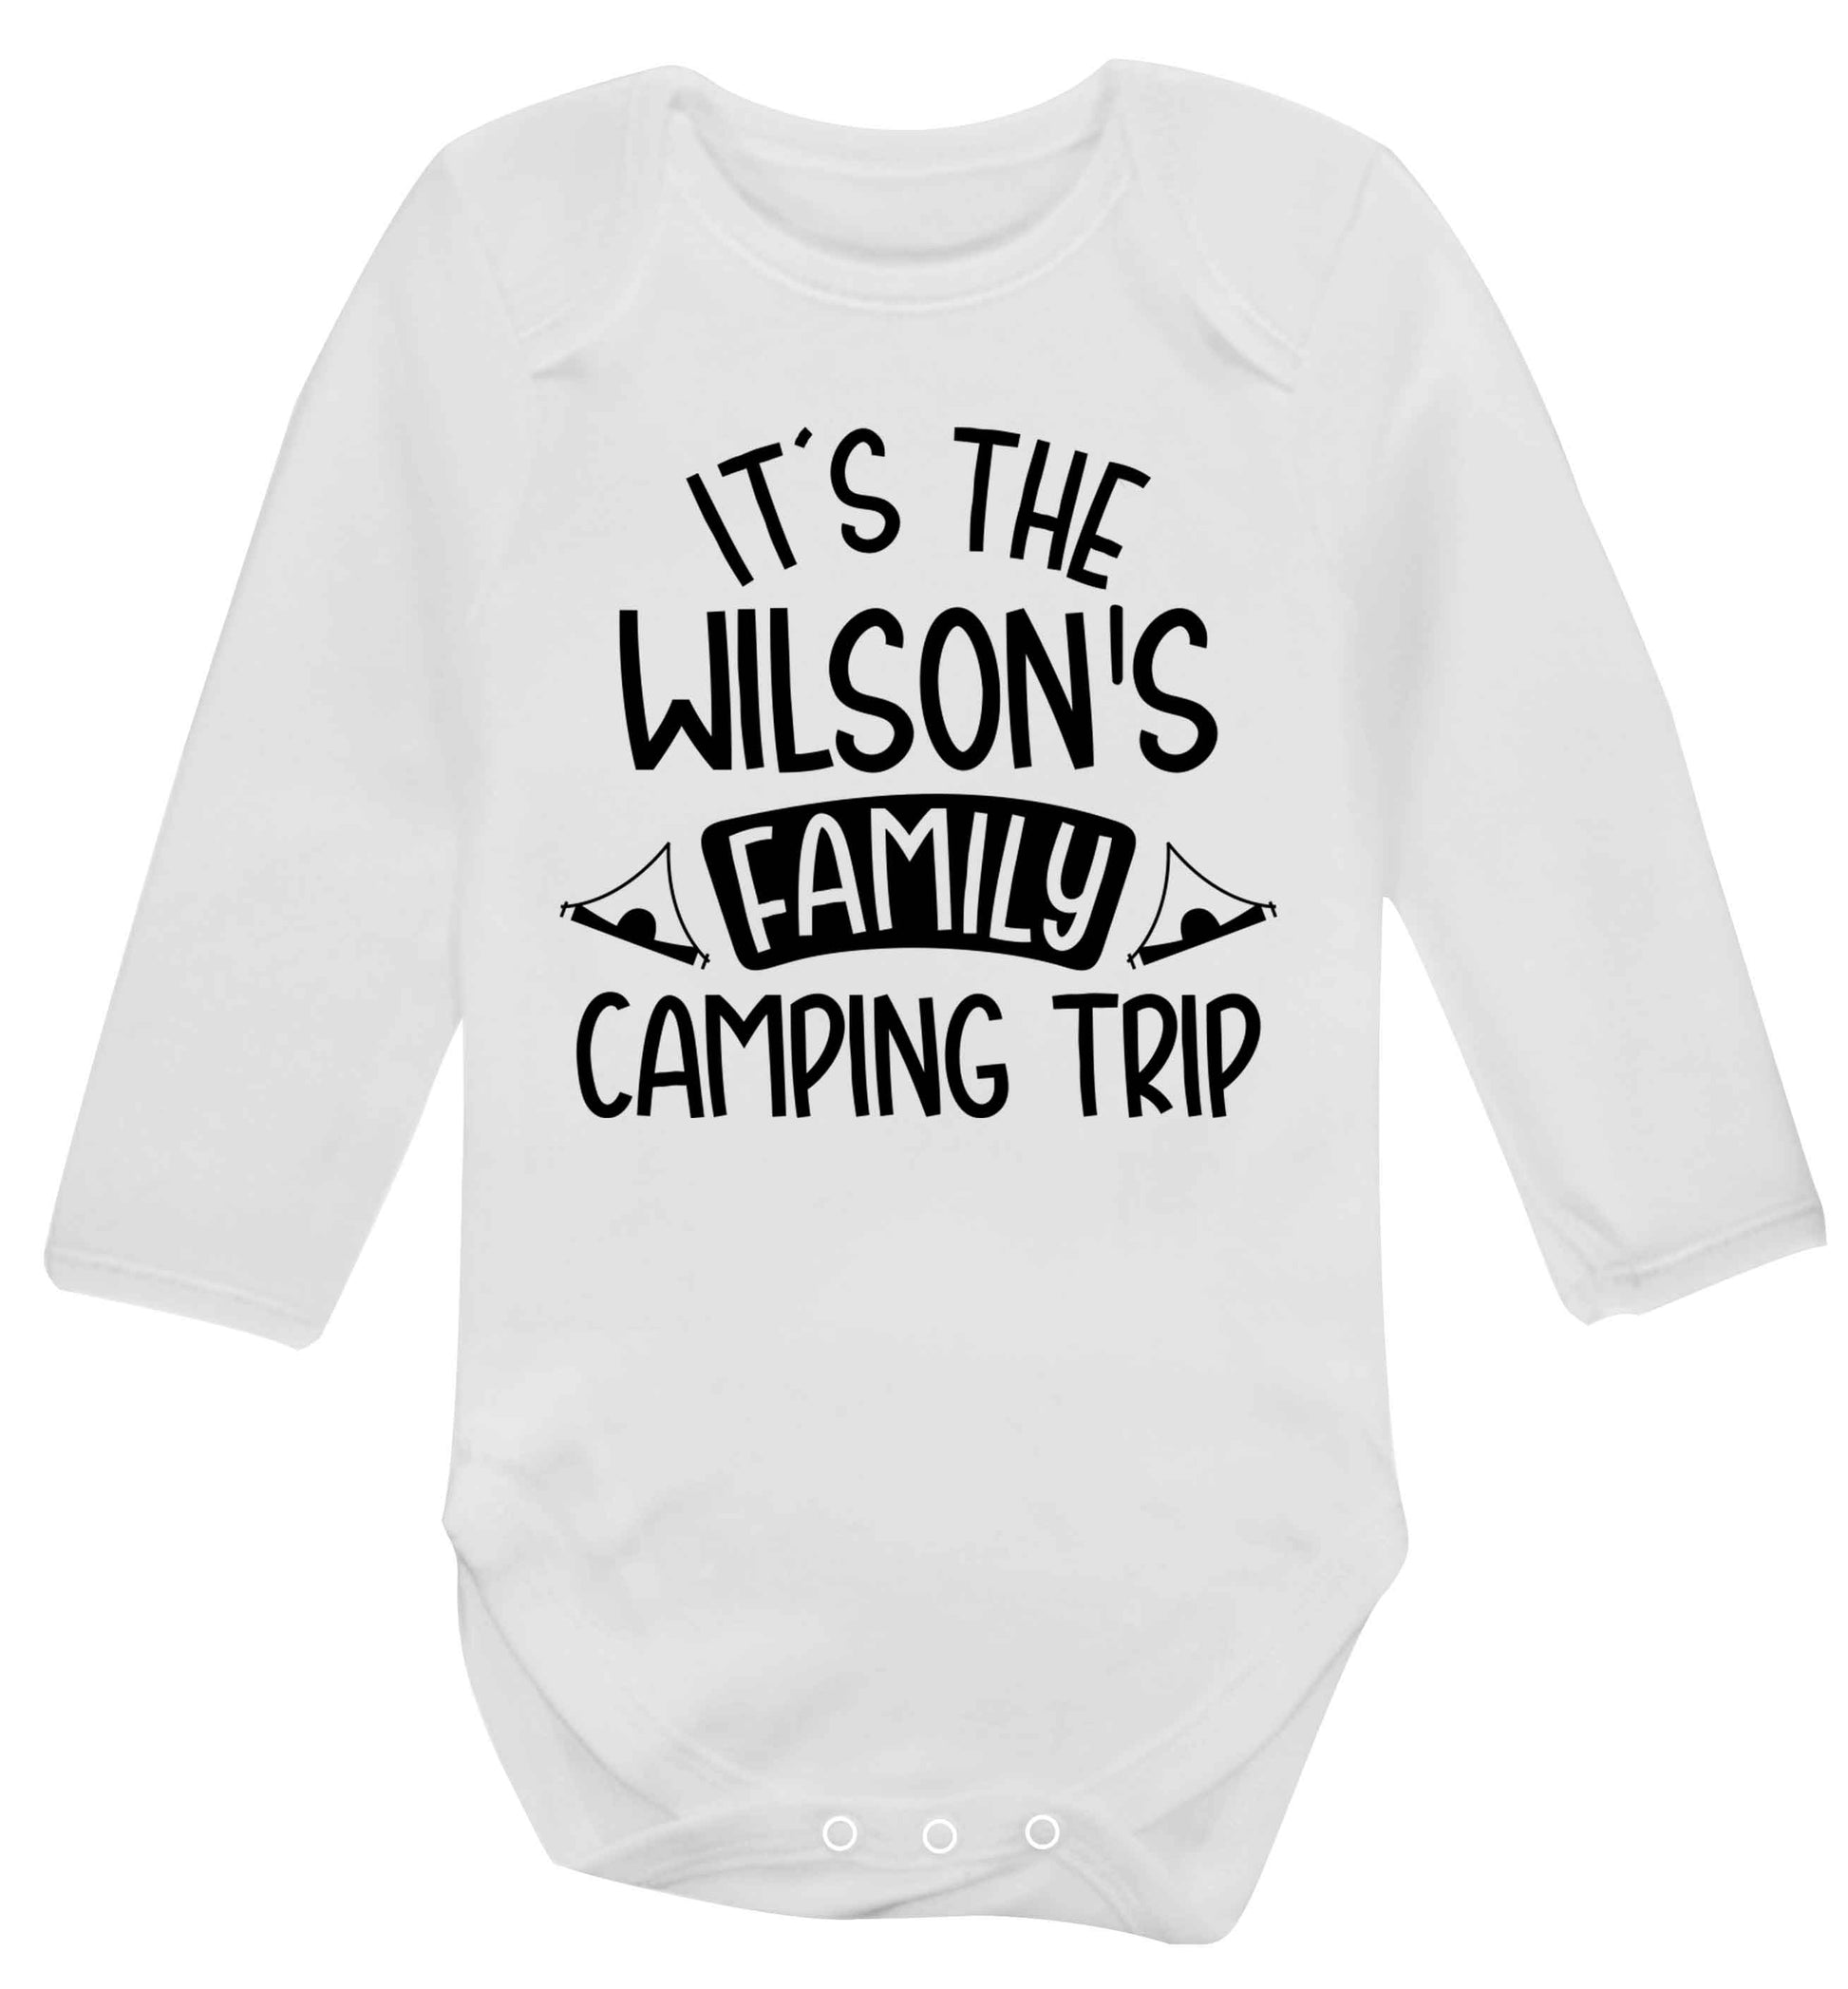 It's the Wilson's family camping trip personalised Baby Vest long sleeved white 6-12 months